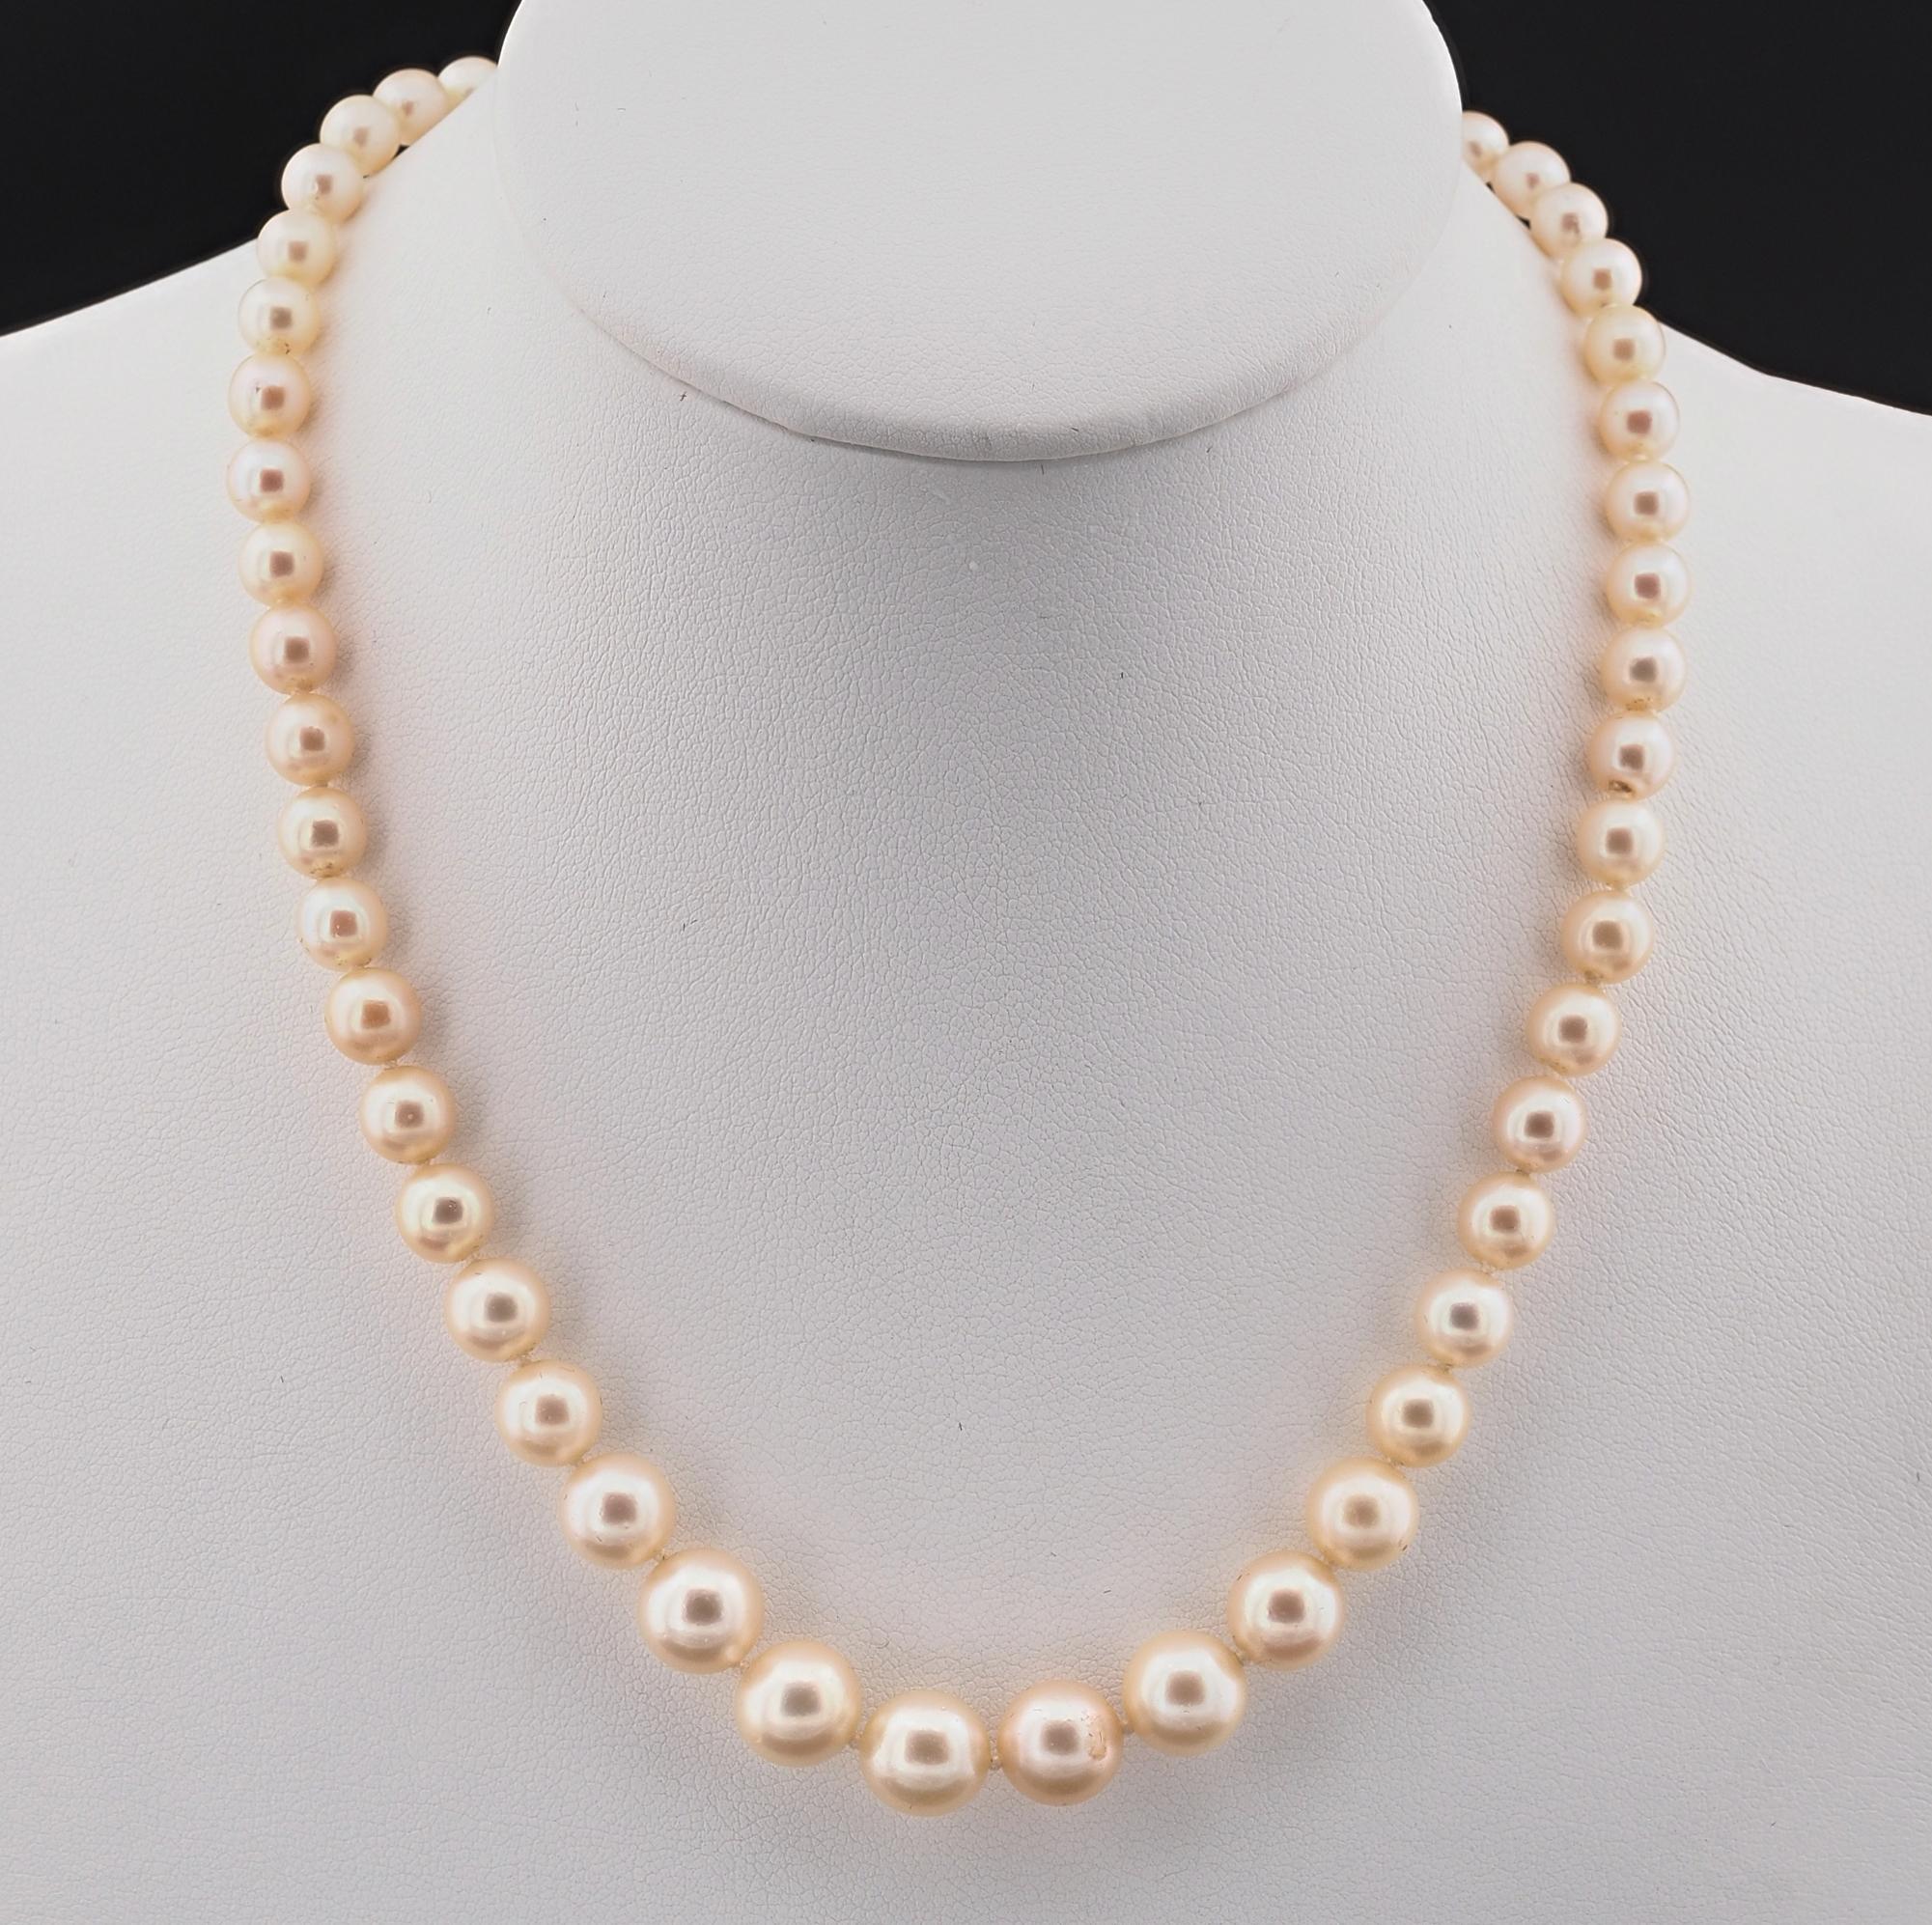 Art Deco Beautiful Find
This charming original Art Deco necklace is 1920 ca
It comprises a beautiful single strand of graduated salt water Pearls going from 8.8 to 5 mm. – good roundness, nice skin, white creamy with goodish reflections, nice